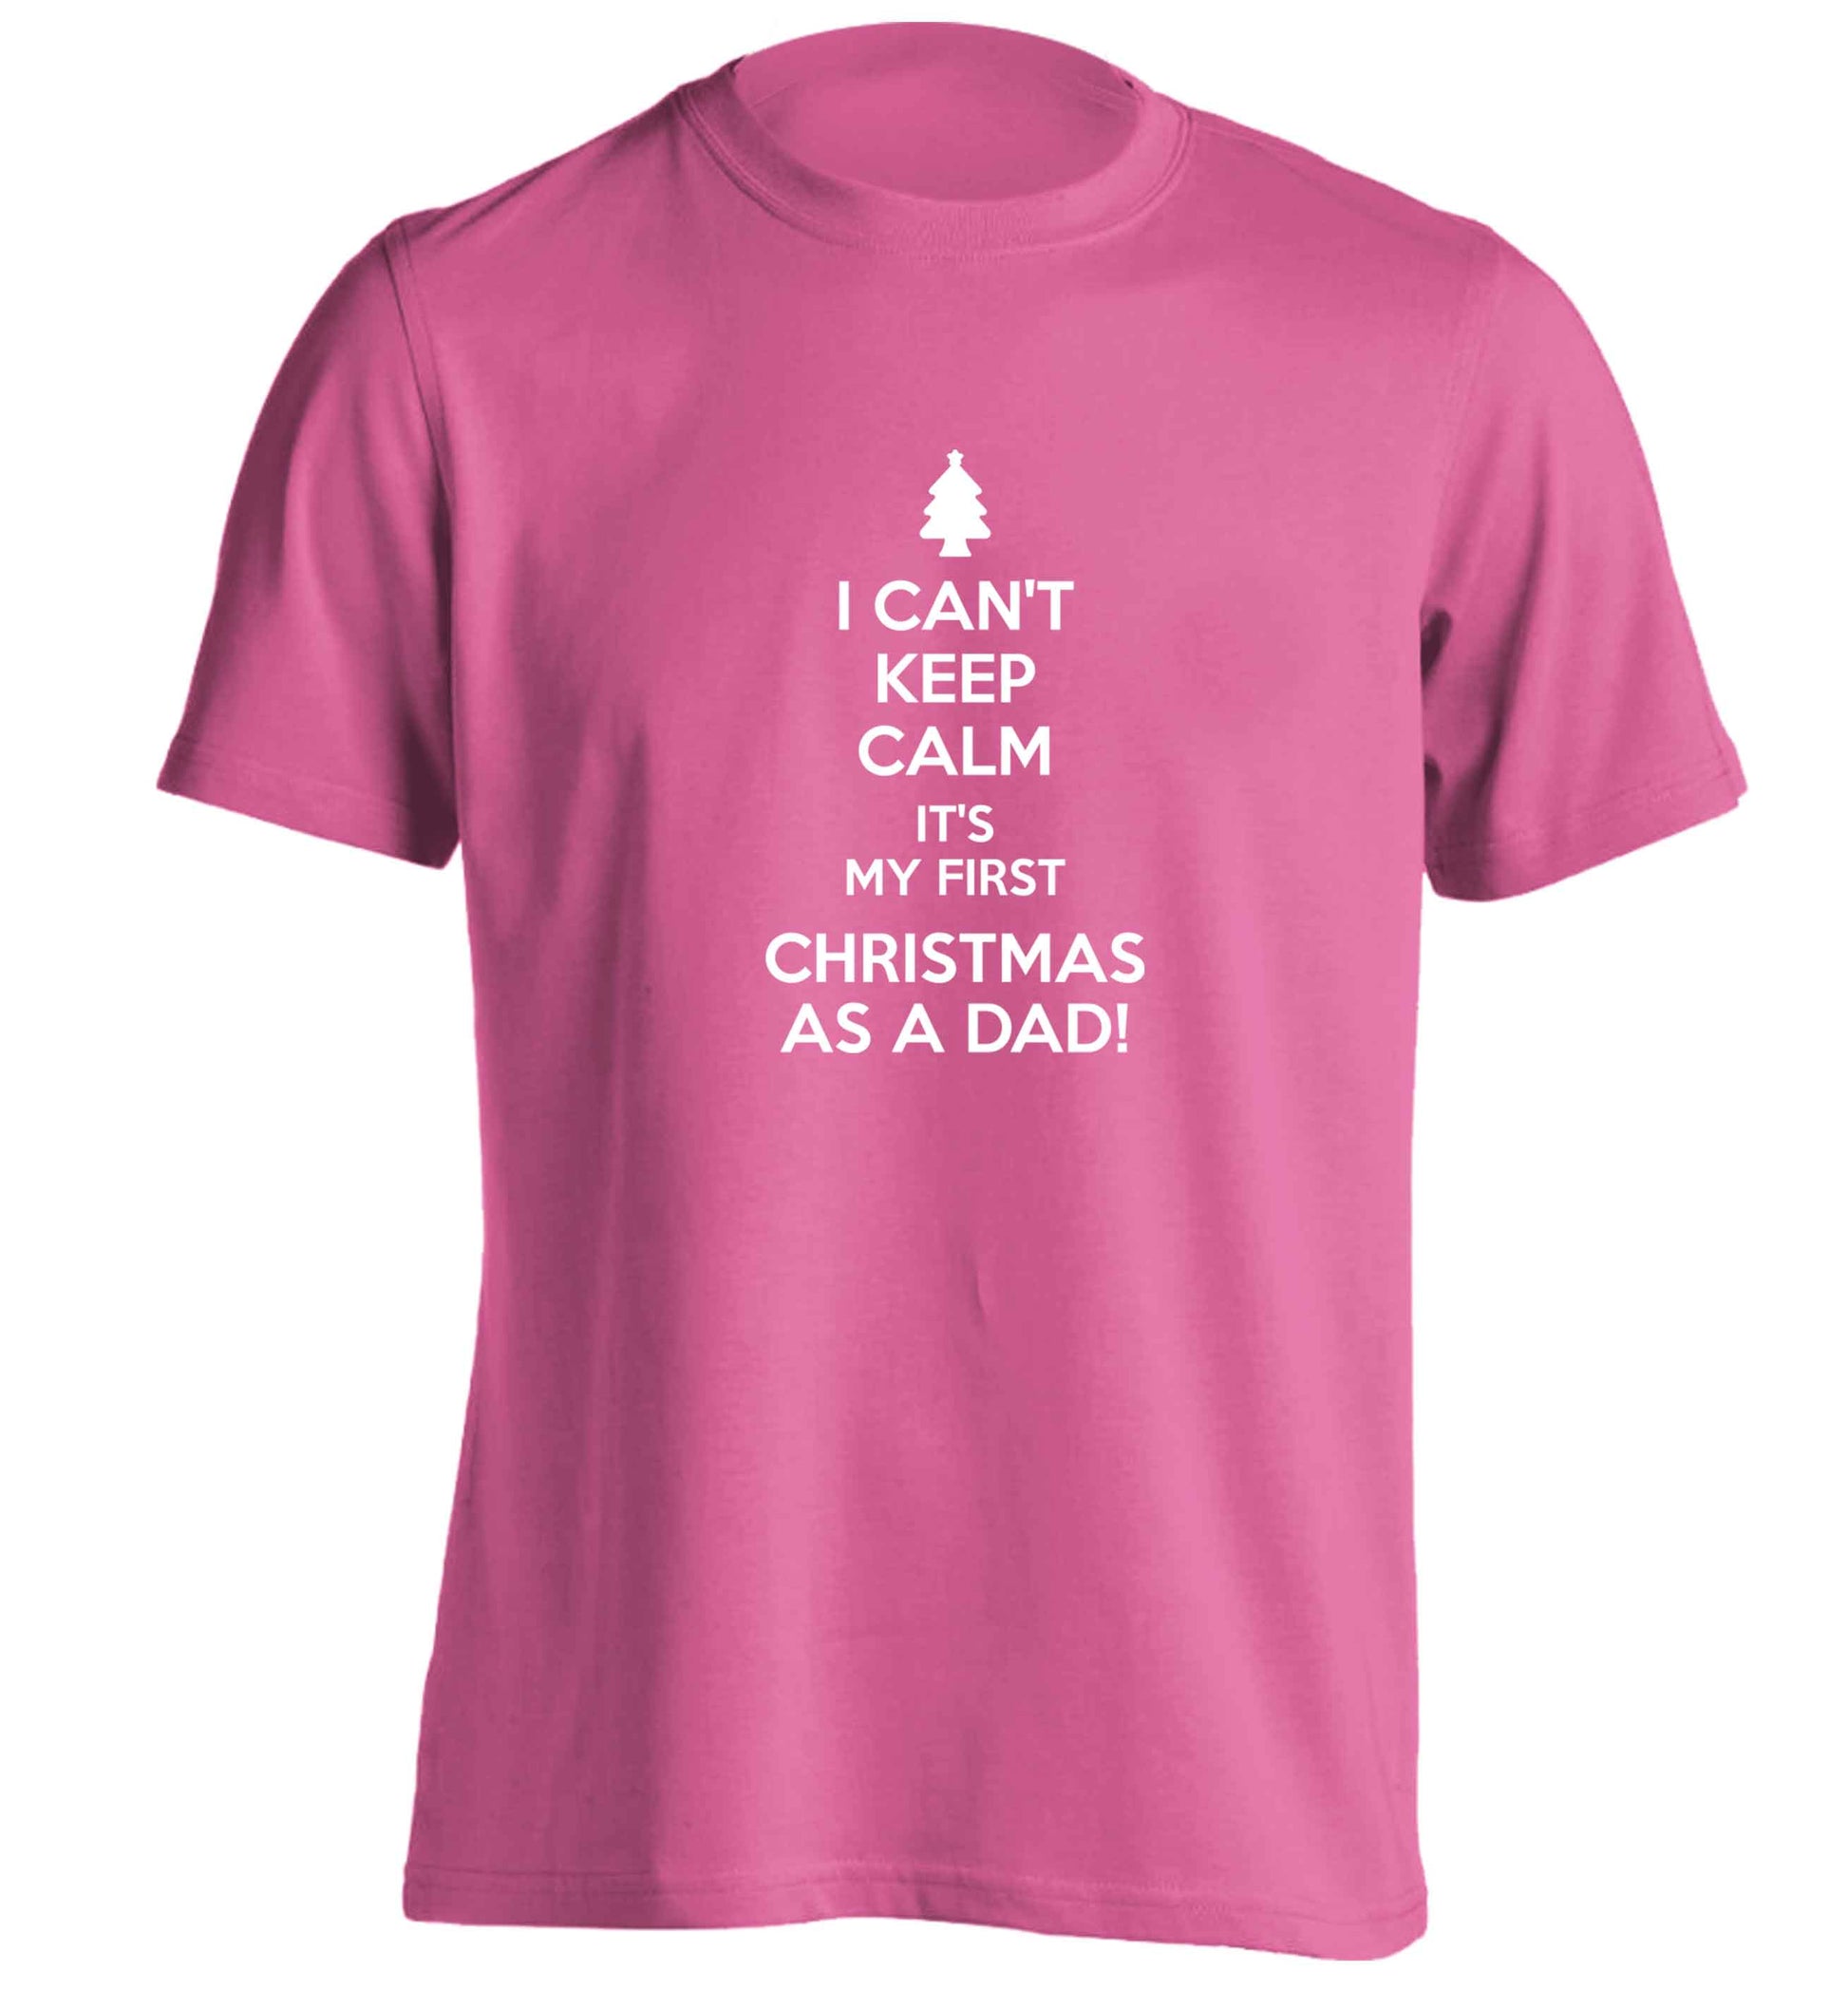 I can't keep calm it's my first Christmas as a dad adults unisex pink Tshirt 2XL